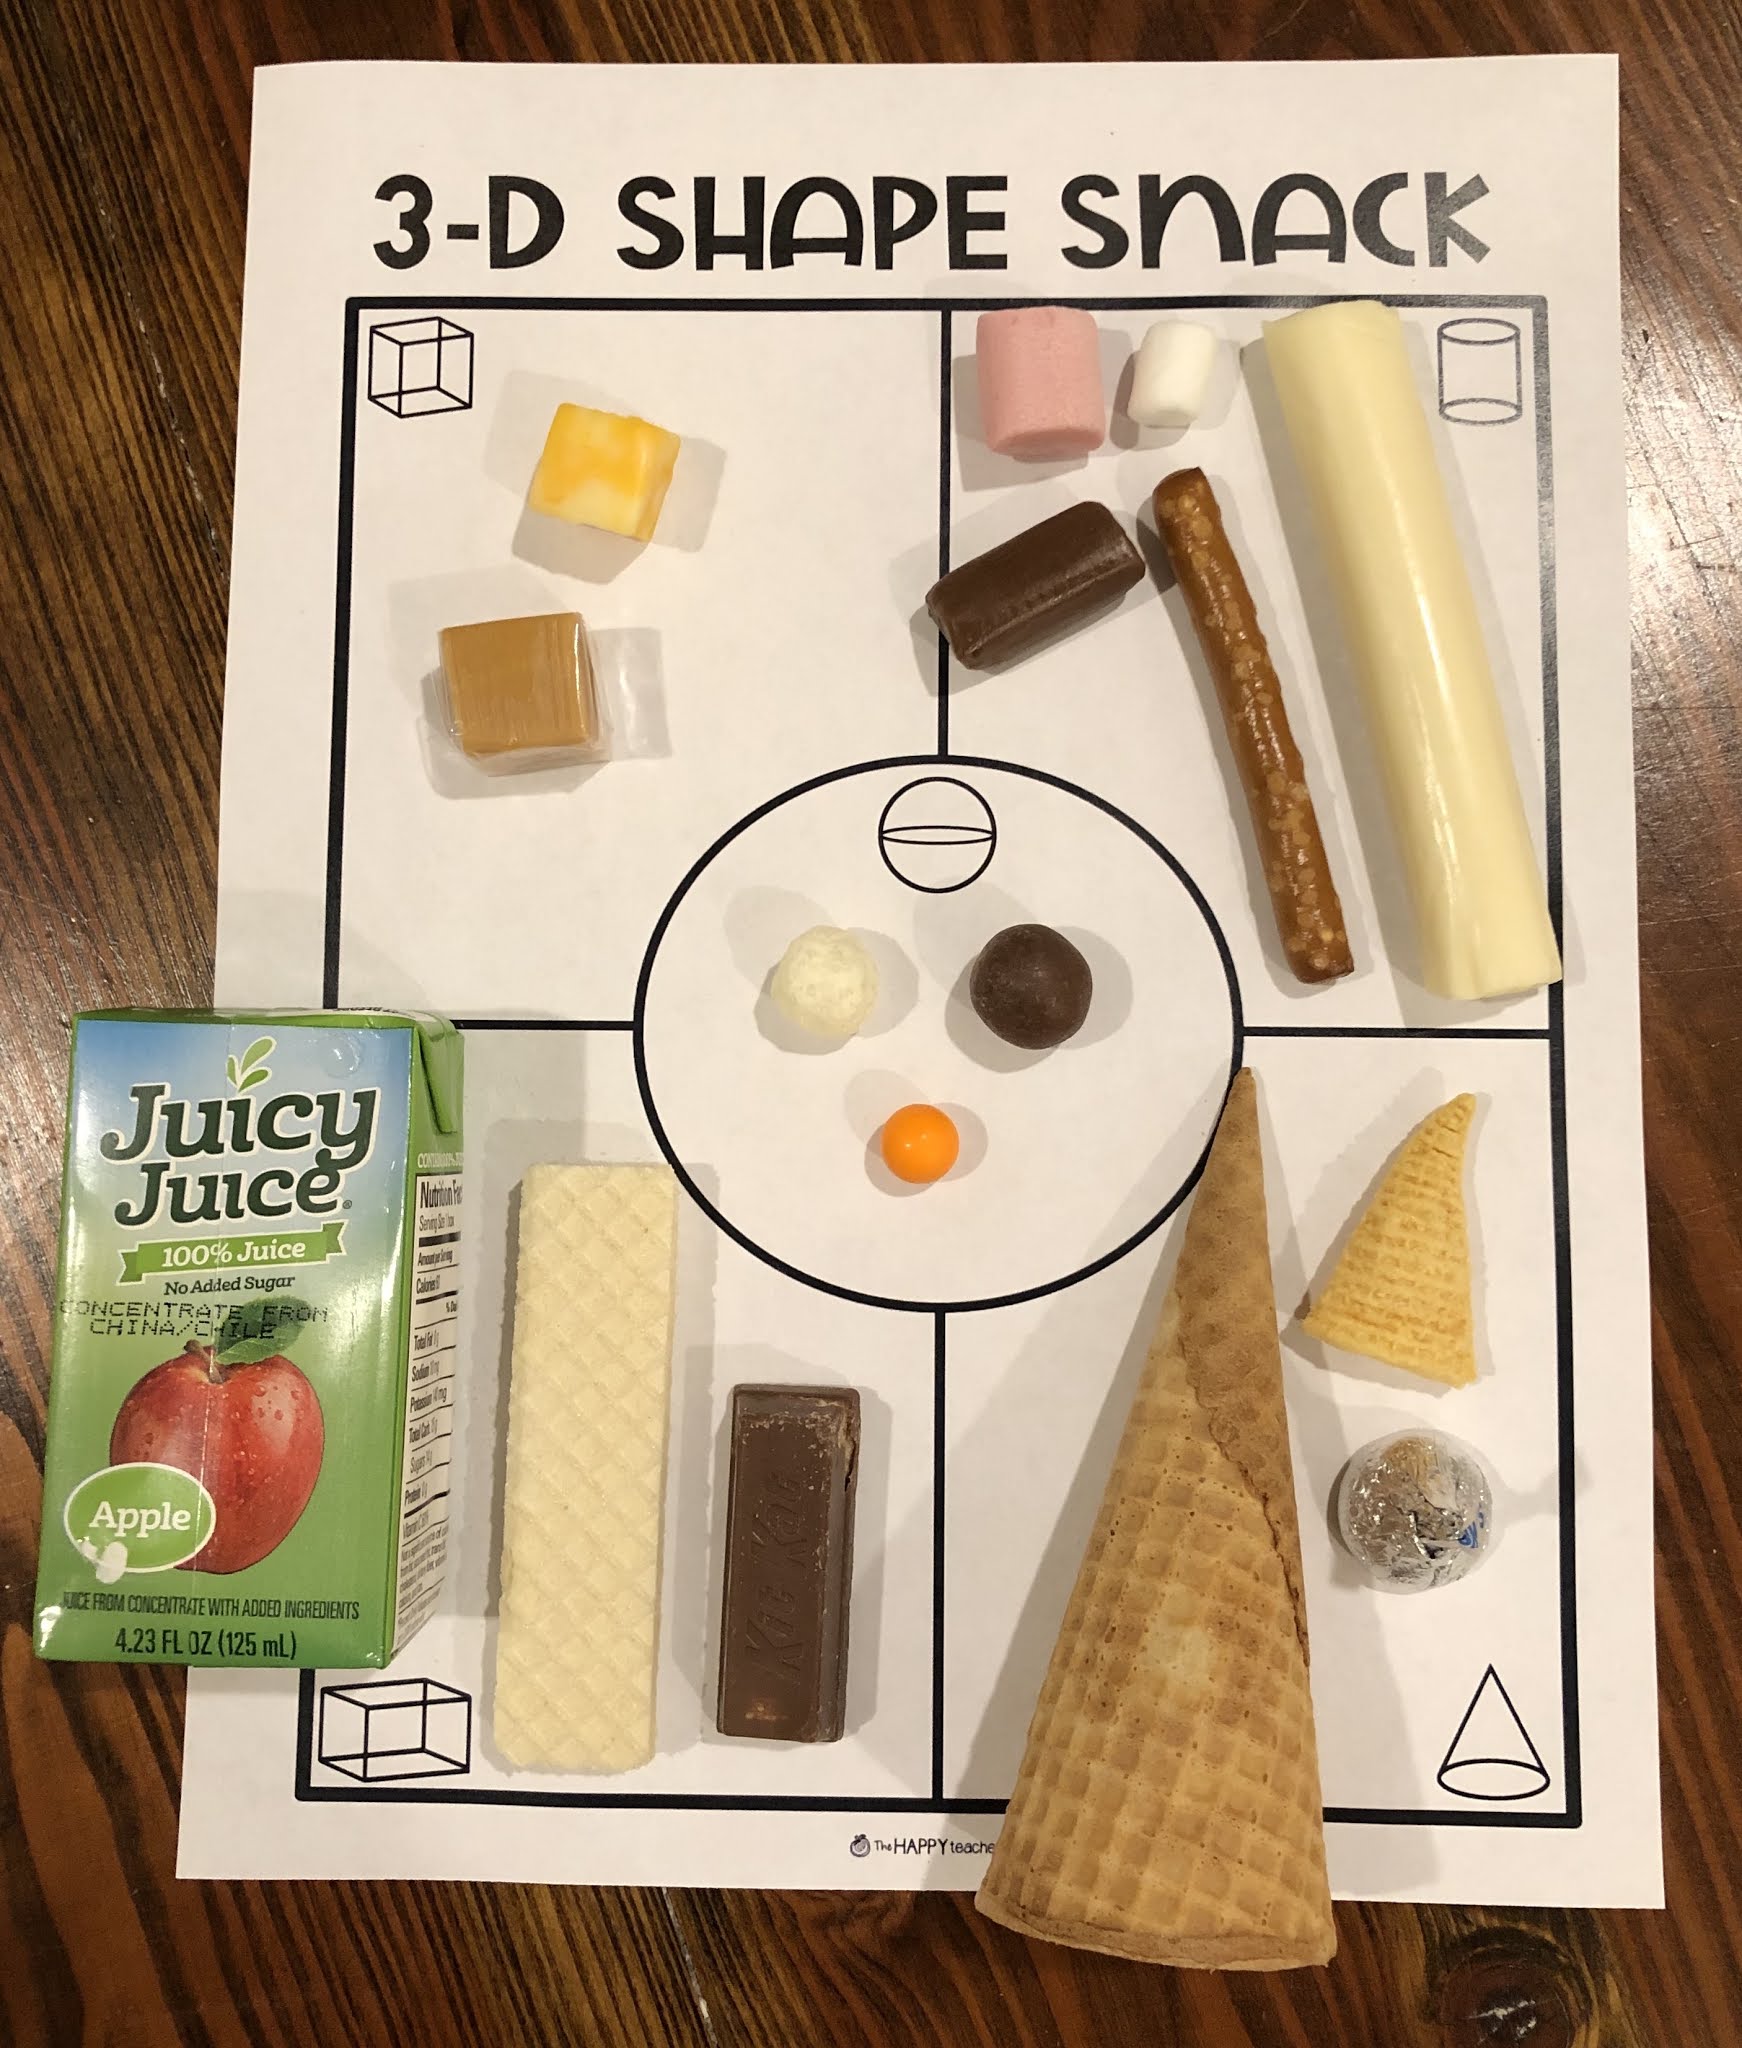 STUDENTS LEARN ABOUT THE 3D SHAPES WITH A FUN ACTIVITY